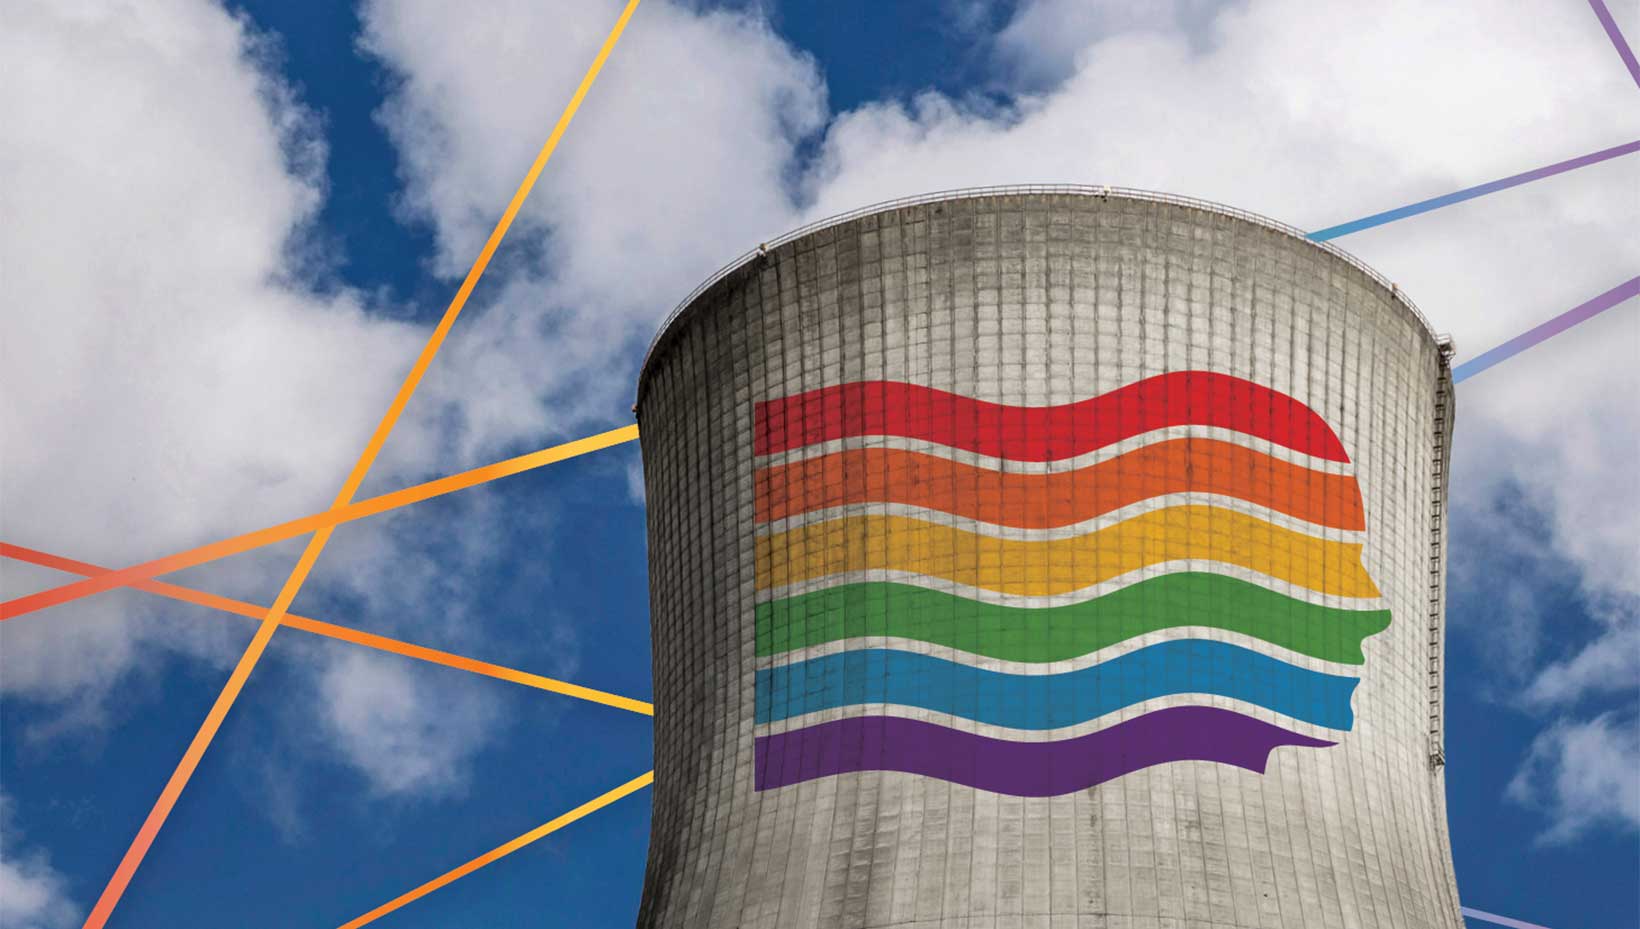 Vogtle Cooling tower with Pride Flag